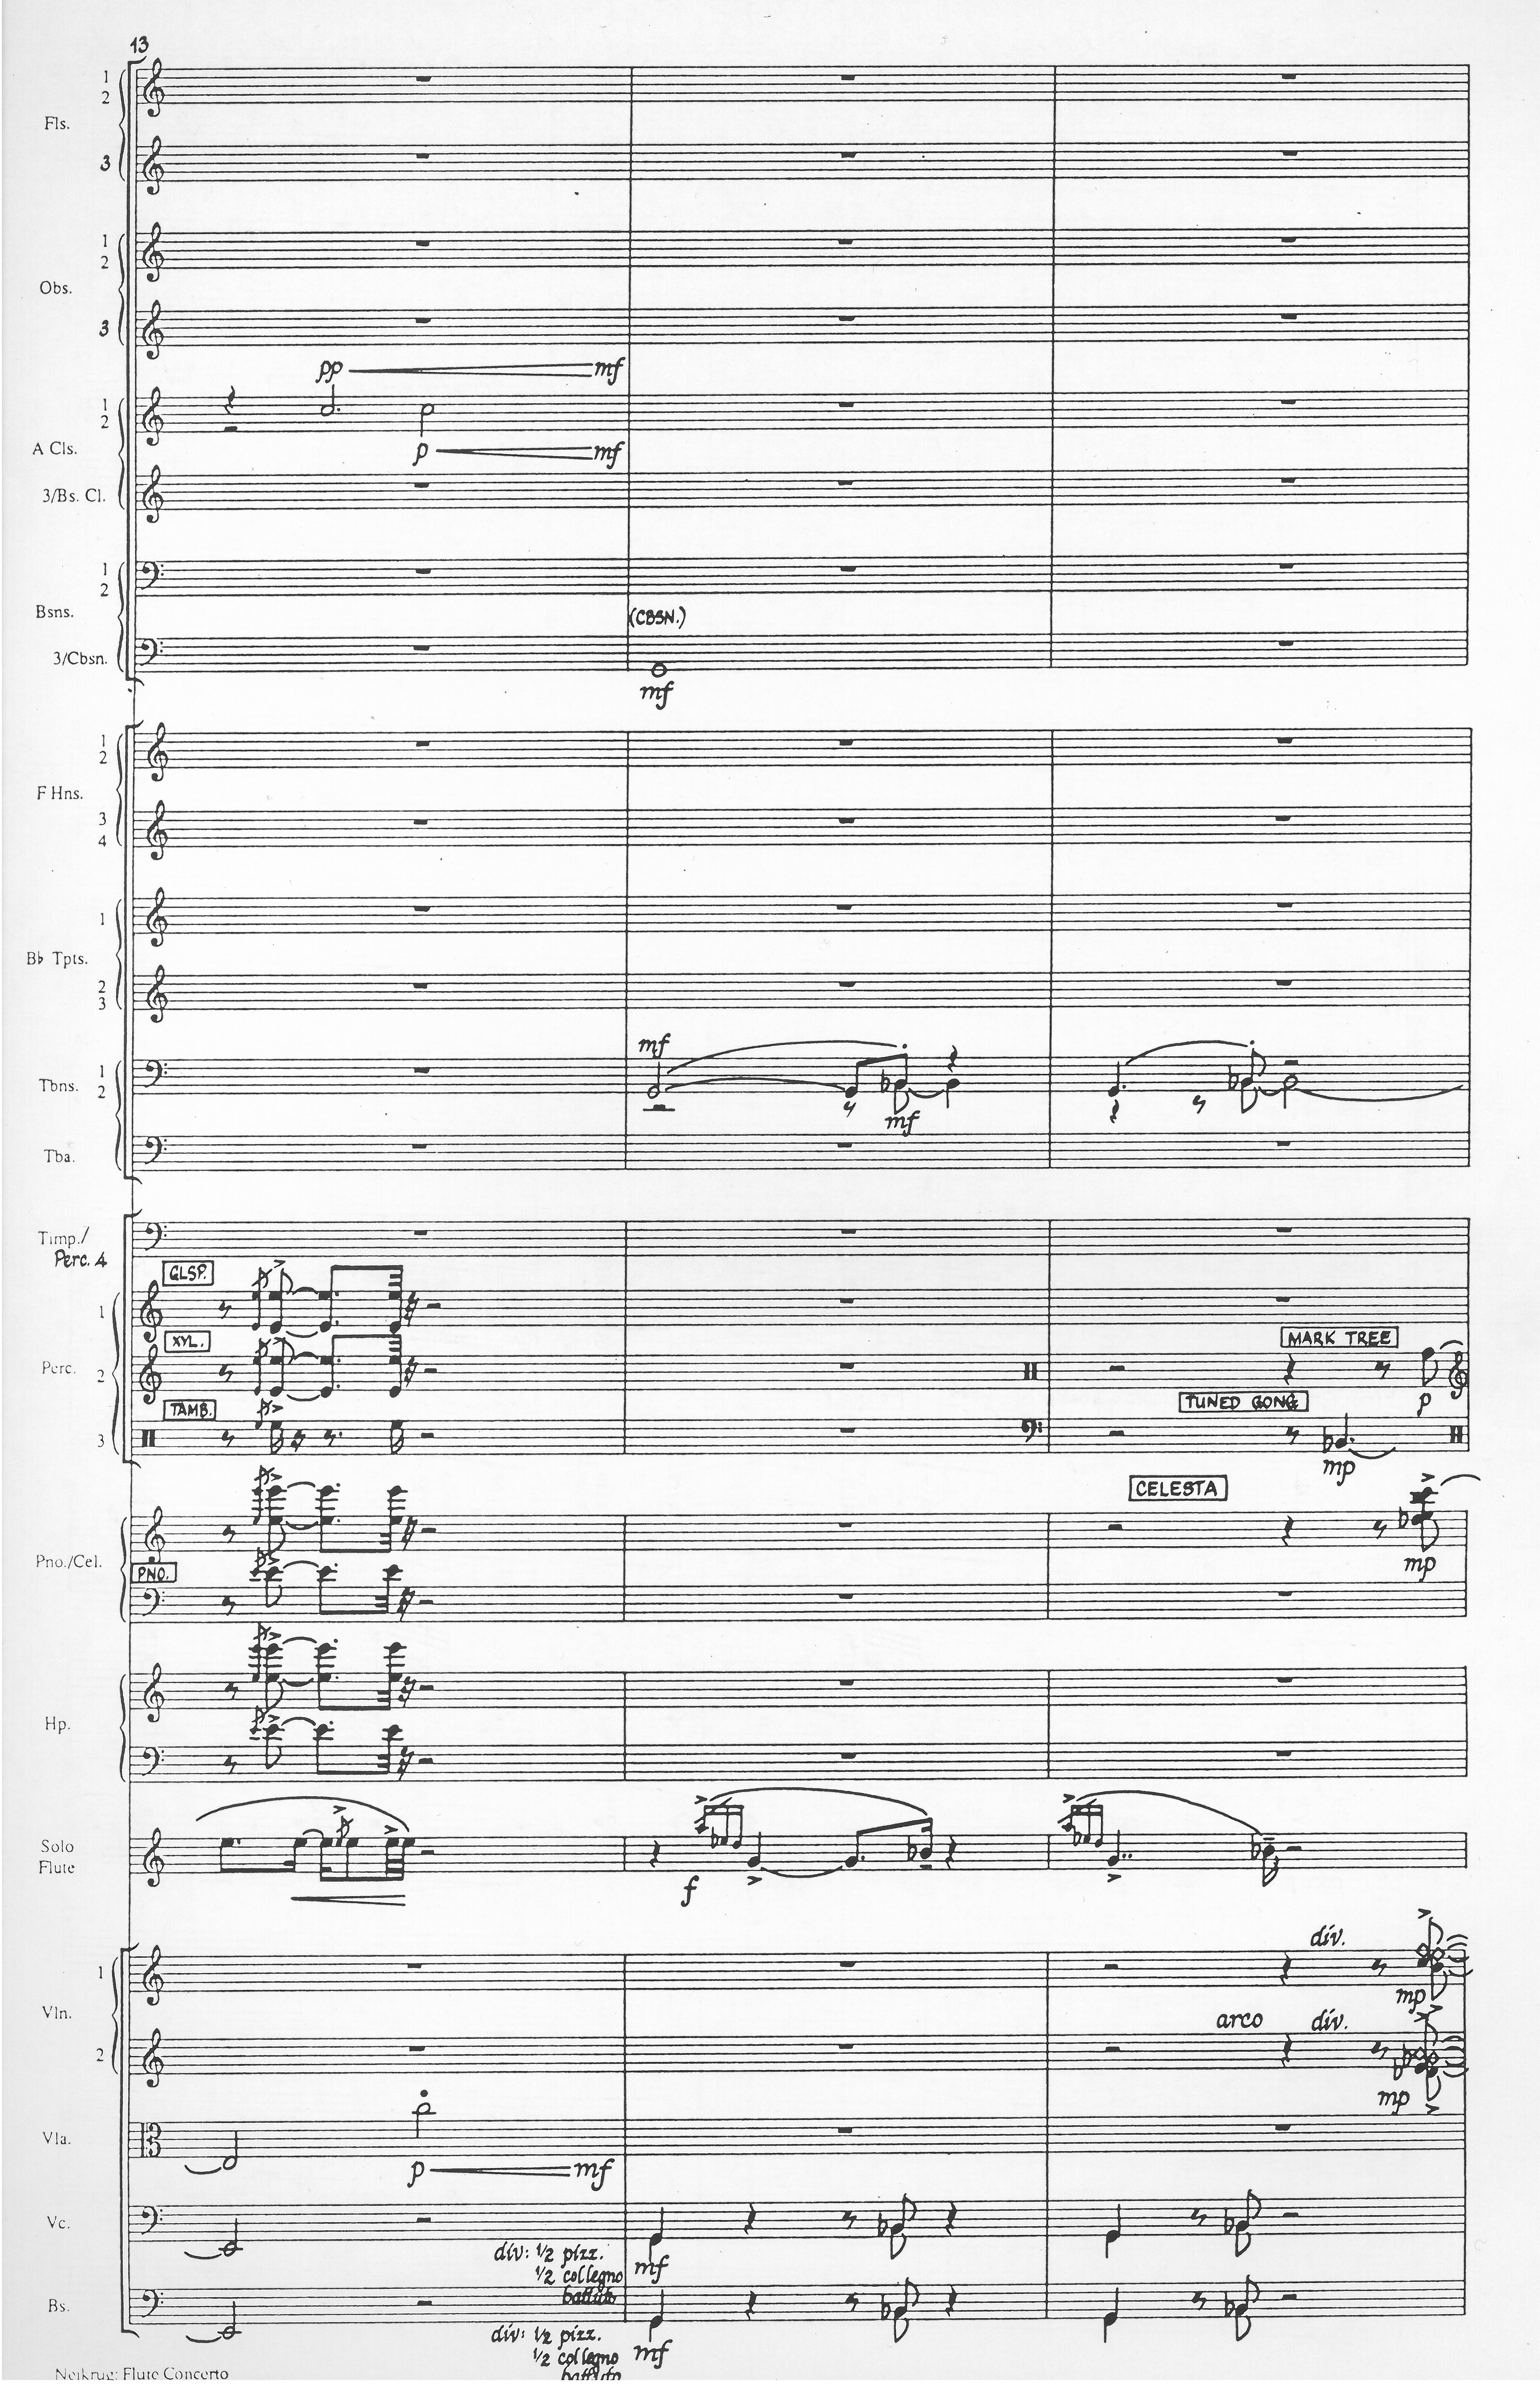 Score excerpt from the Flute Concerto by Marc Neikrug 